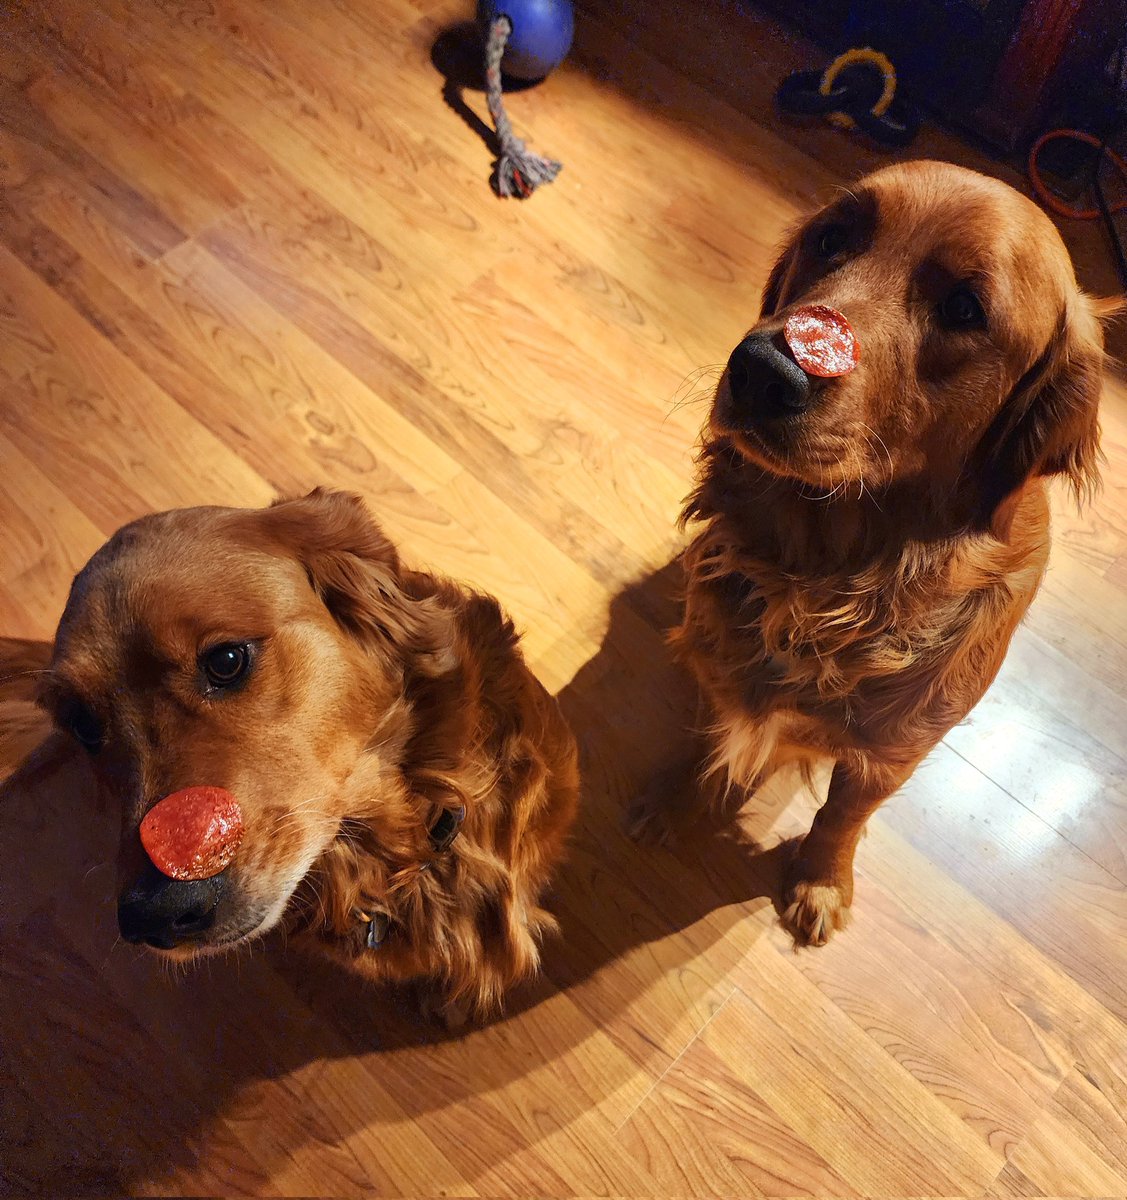 Although this looks photoshopped, it is not. Balancing pepperoni on our snouts. We did it!! #dogsoftwitter #goldenretriever